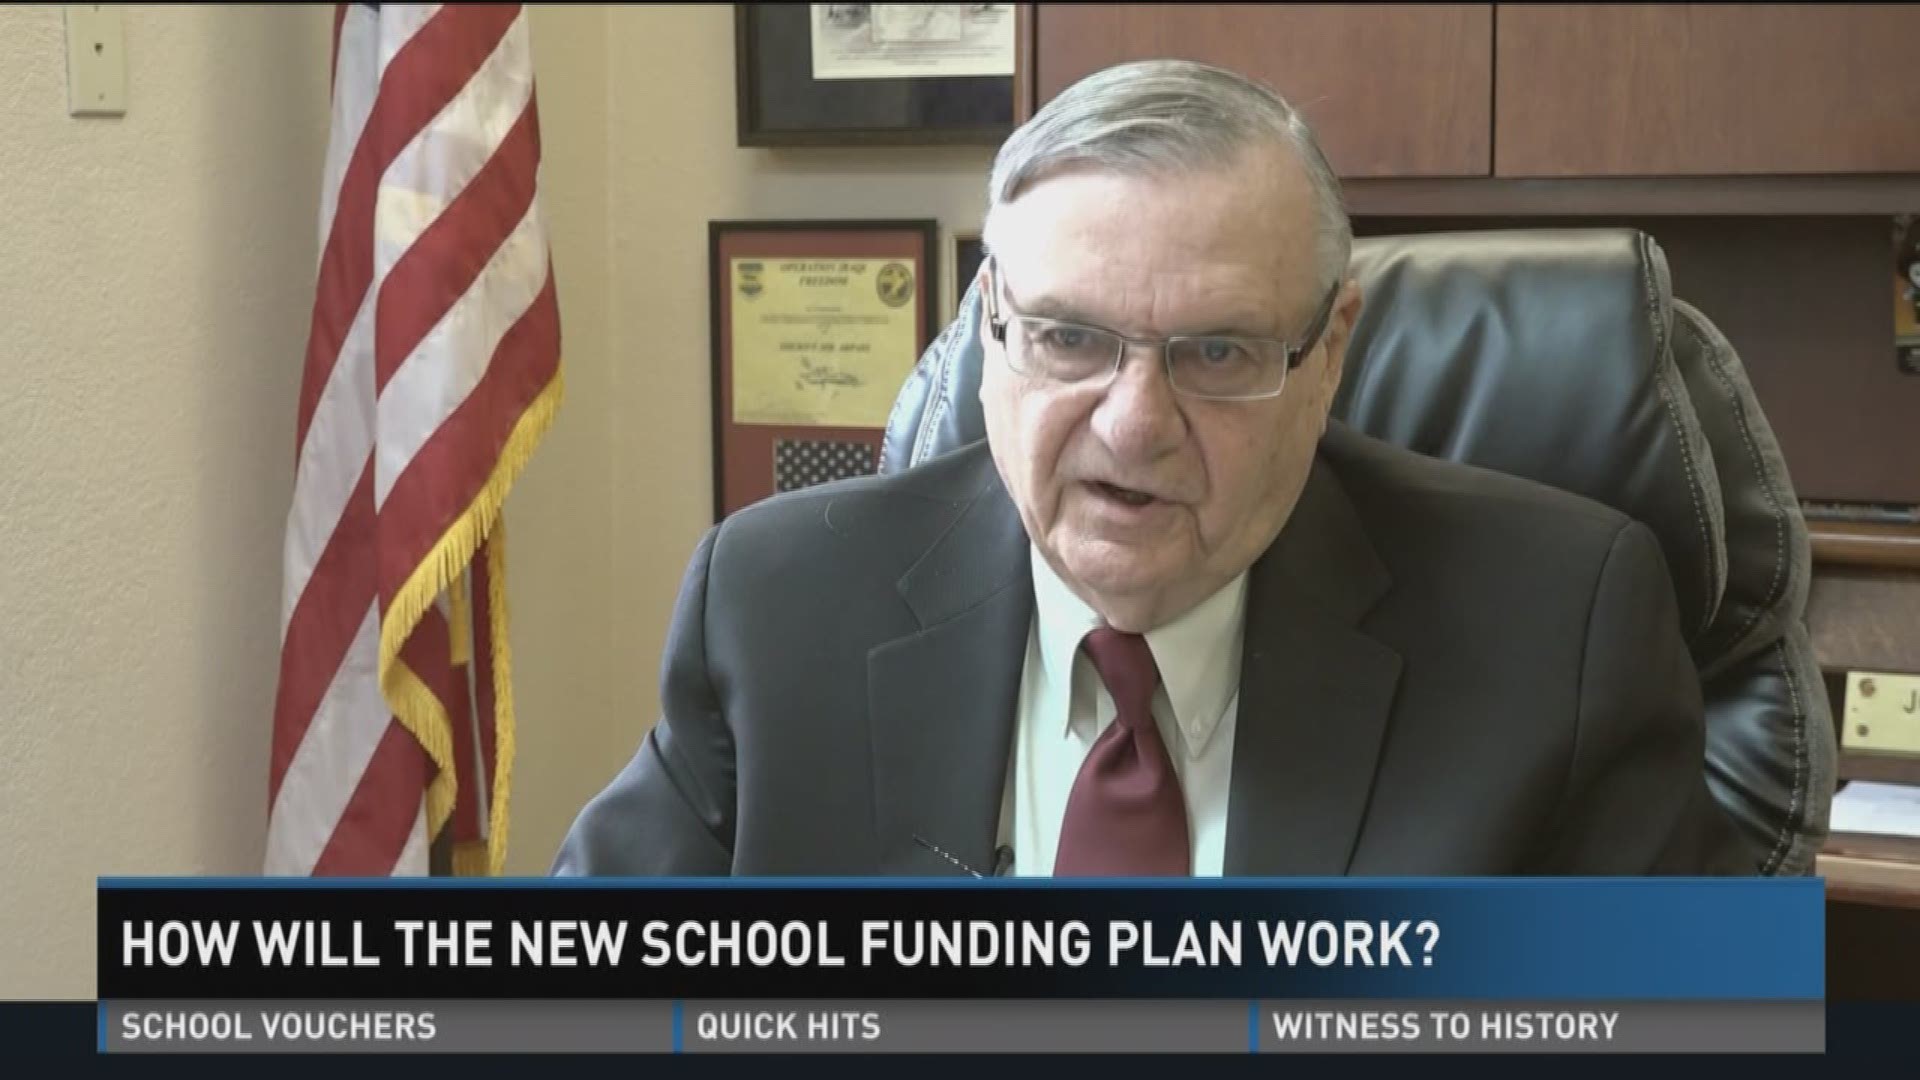 Former Sheriff Joe Arpaio was a key supporter of Doug Ducey during Ducey's run for governor in 2014. But Ducey says he's staying out of Arpaio's new race, for the U.S. Senate. Also, the governor pushes back on questions about his new education spending pl